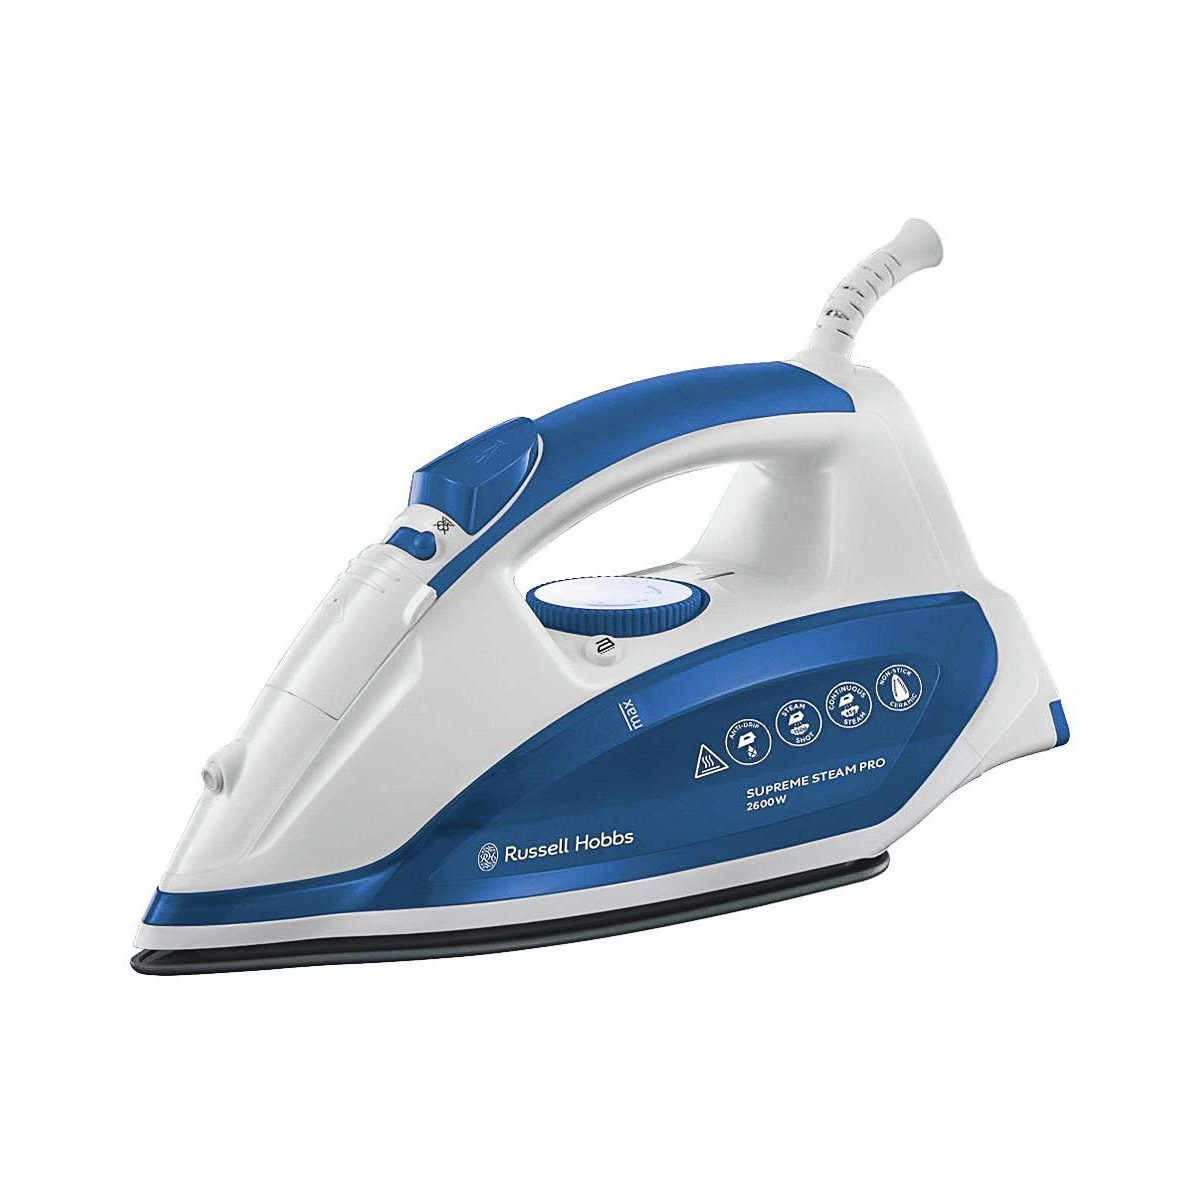 Wholesale Russell Hobbs Supreme Steam Pro Iron 22501 | CK Electricals ...